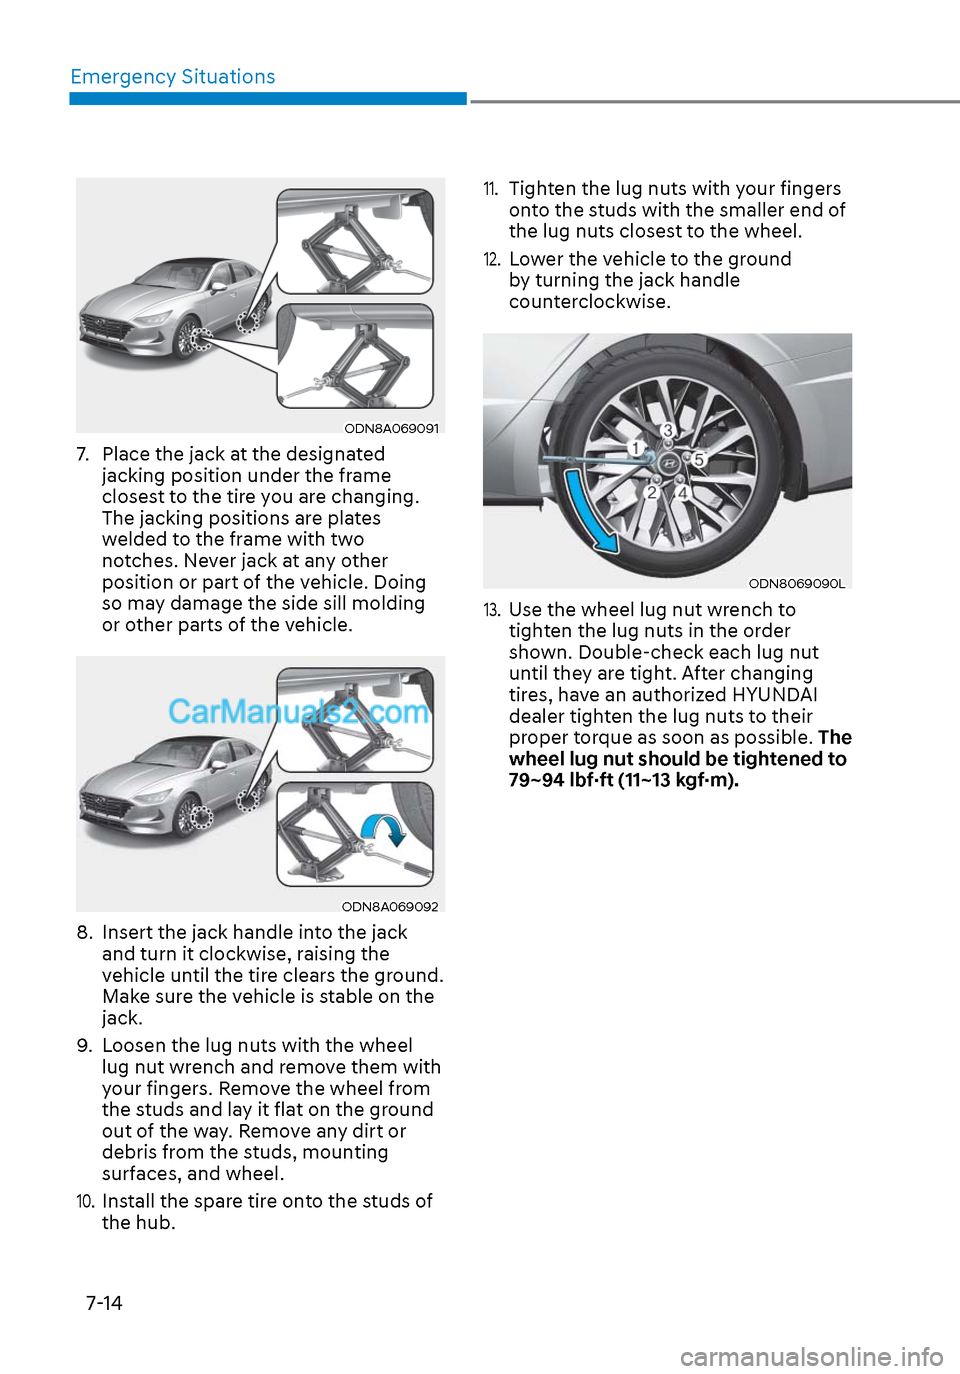 Hyundai Sonata 2020  Owners Manual Emergency Situations7-14
ODN8A069091ODN8A069091
7.  Place the jack at the designated  jacking position under the frame 
closest to the tire you are changing. 
The jacking positions are plates 
welded 